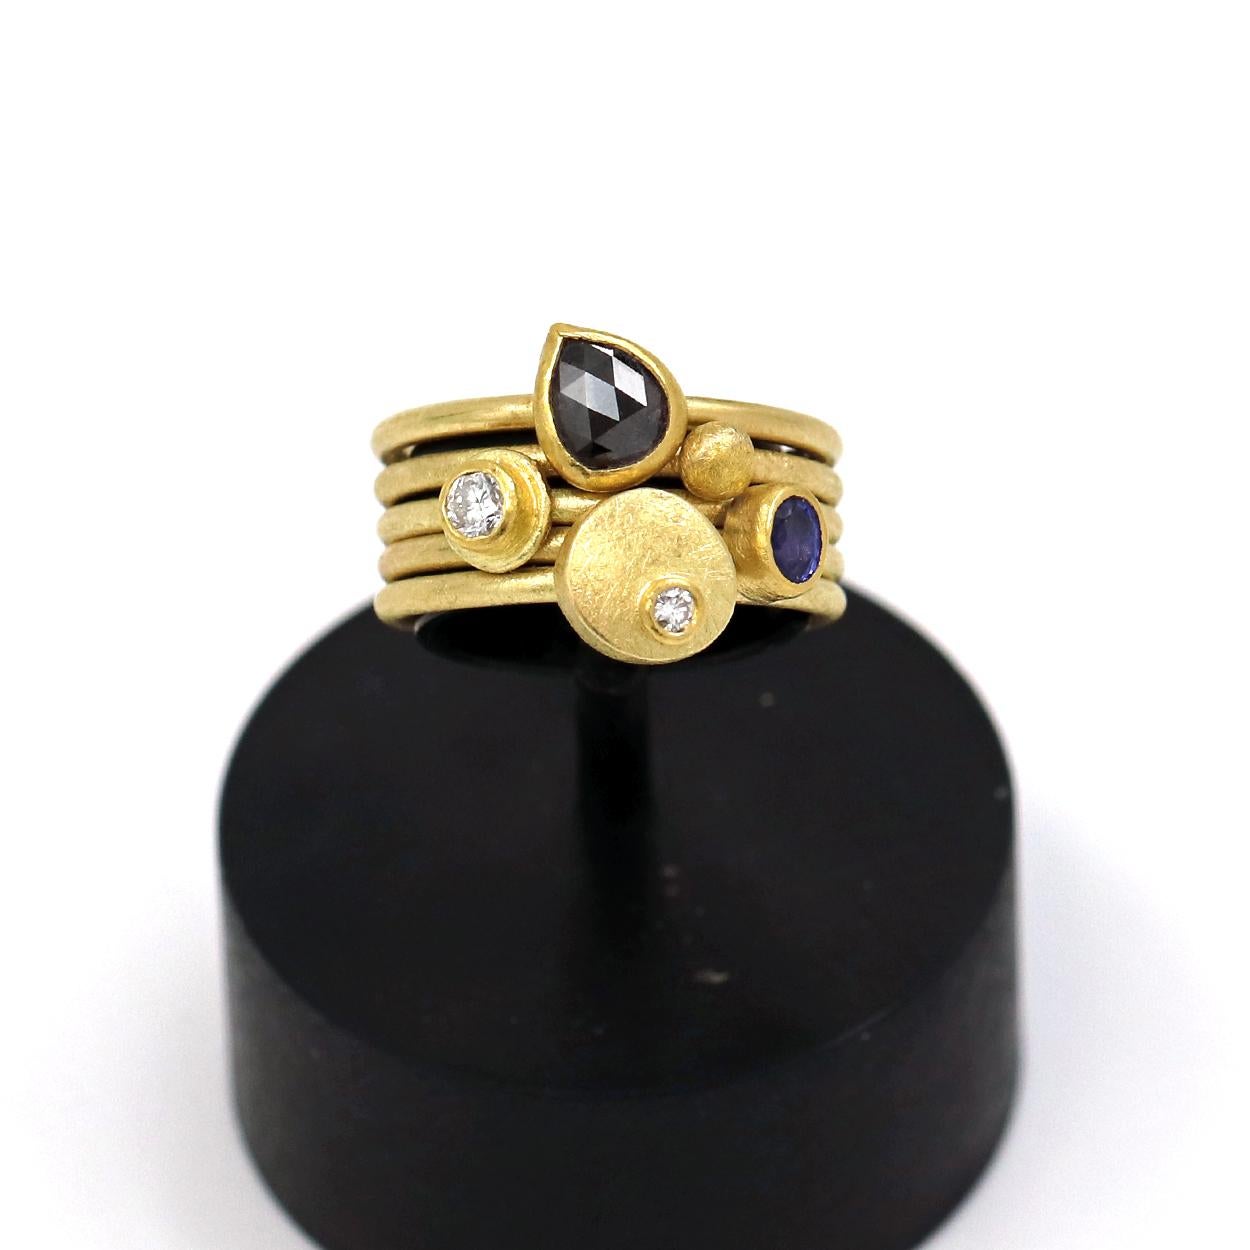 One-of-a-Kind Stacking Ring Set (also available individually) hand-fabricated by jewelry maker Petra Class in her signature-finished 22k yellow gold on 18k yellow gold bands. Showcasing bezel-set gemstones from top to bottom:

1. Framed Round